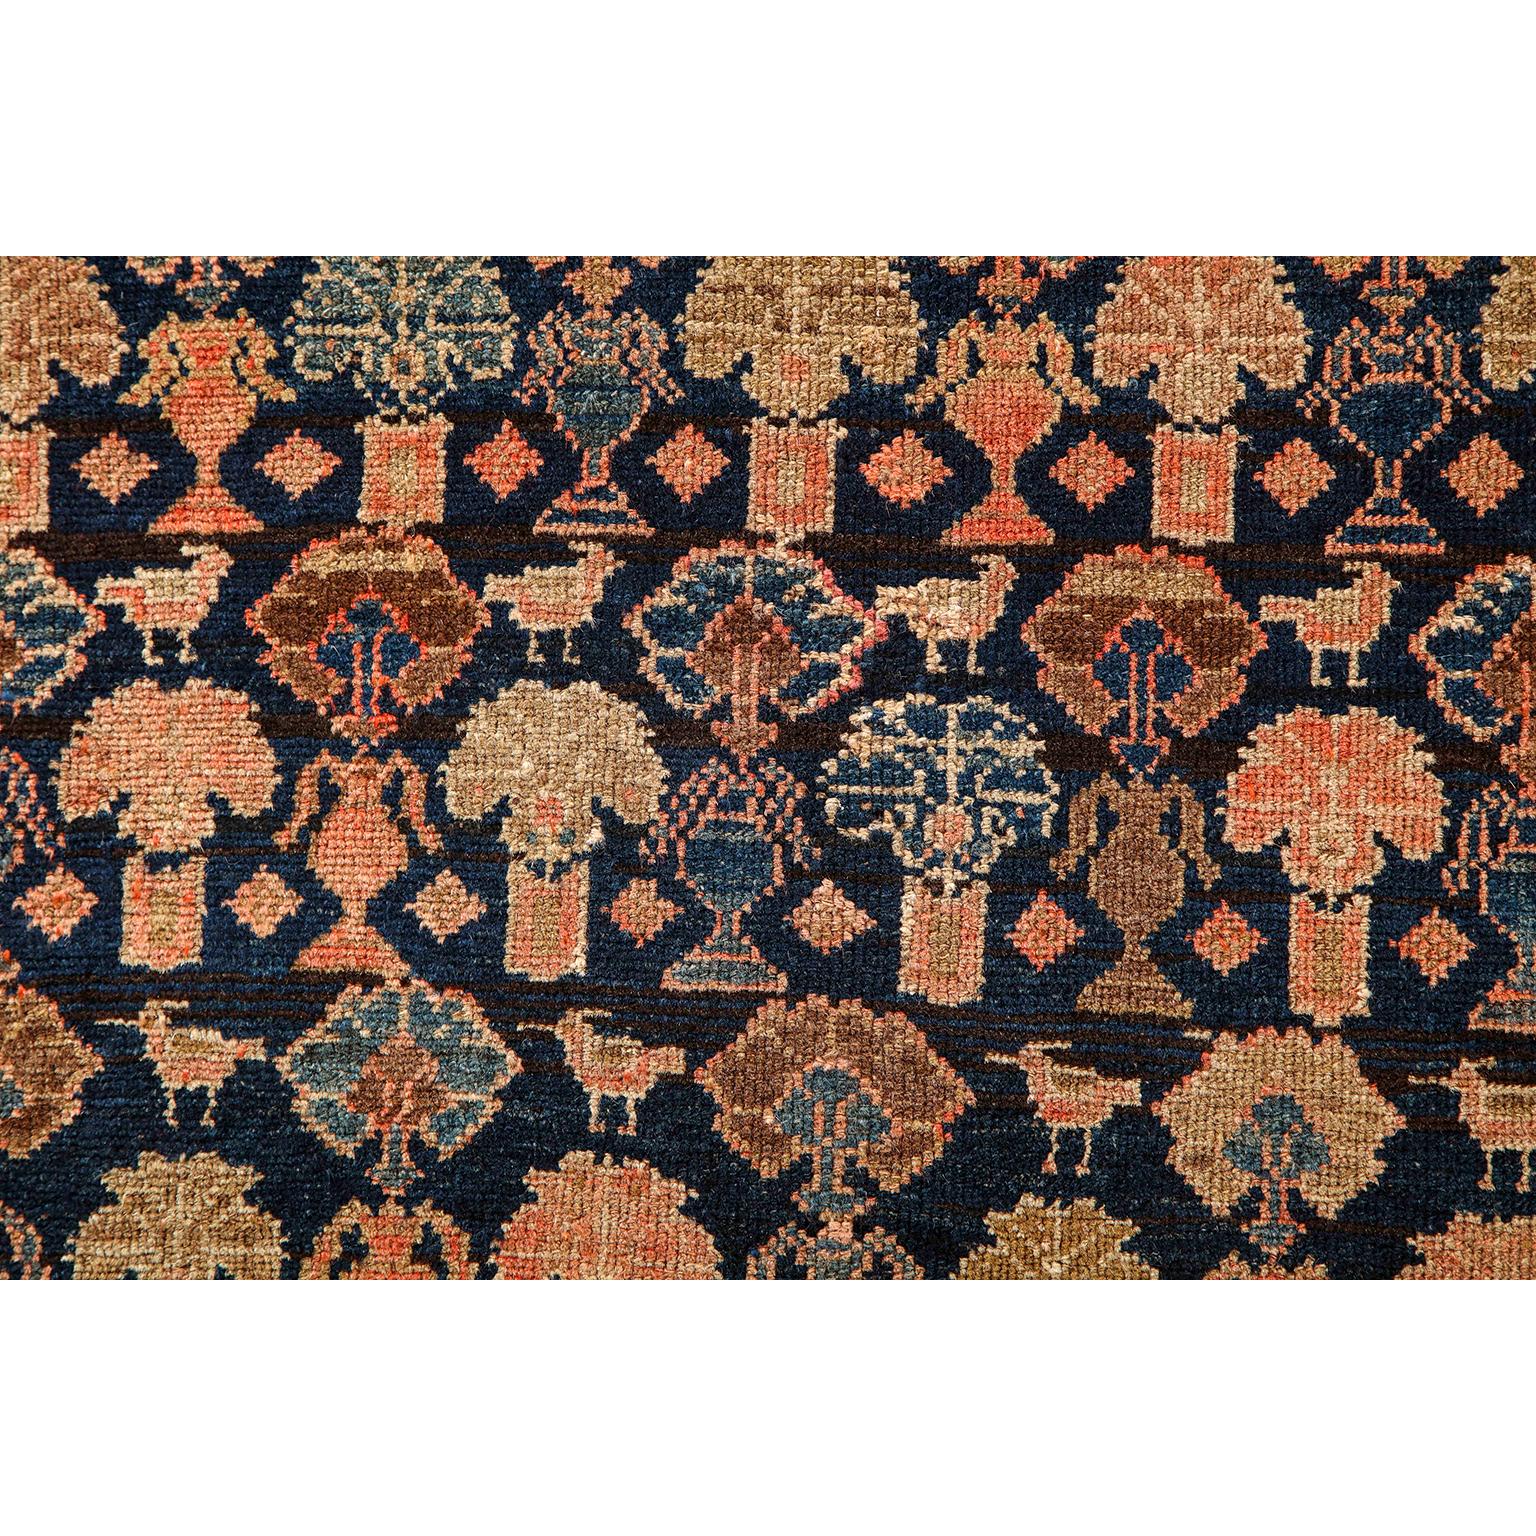 Early 20th Century Antique 1900s Persian Malayer Rug, Flower Motifs, Wool, 5' x 7' For Sale